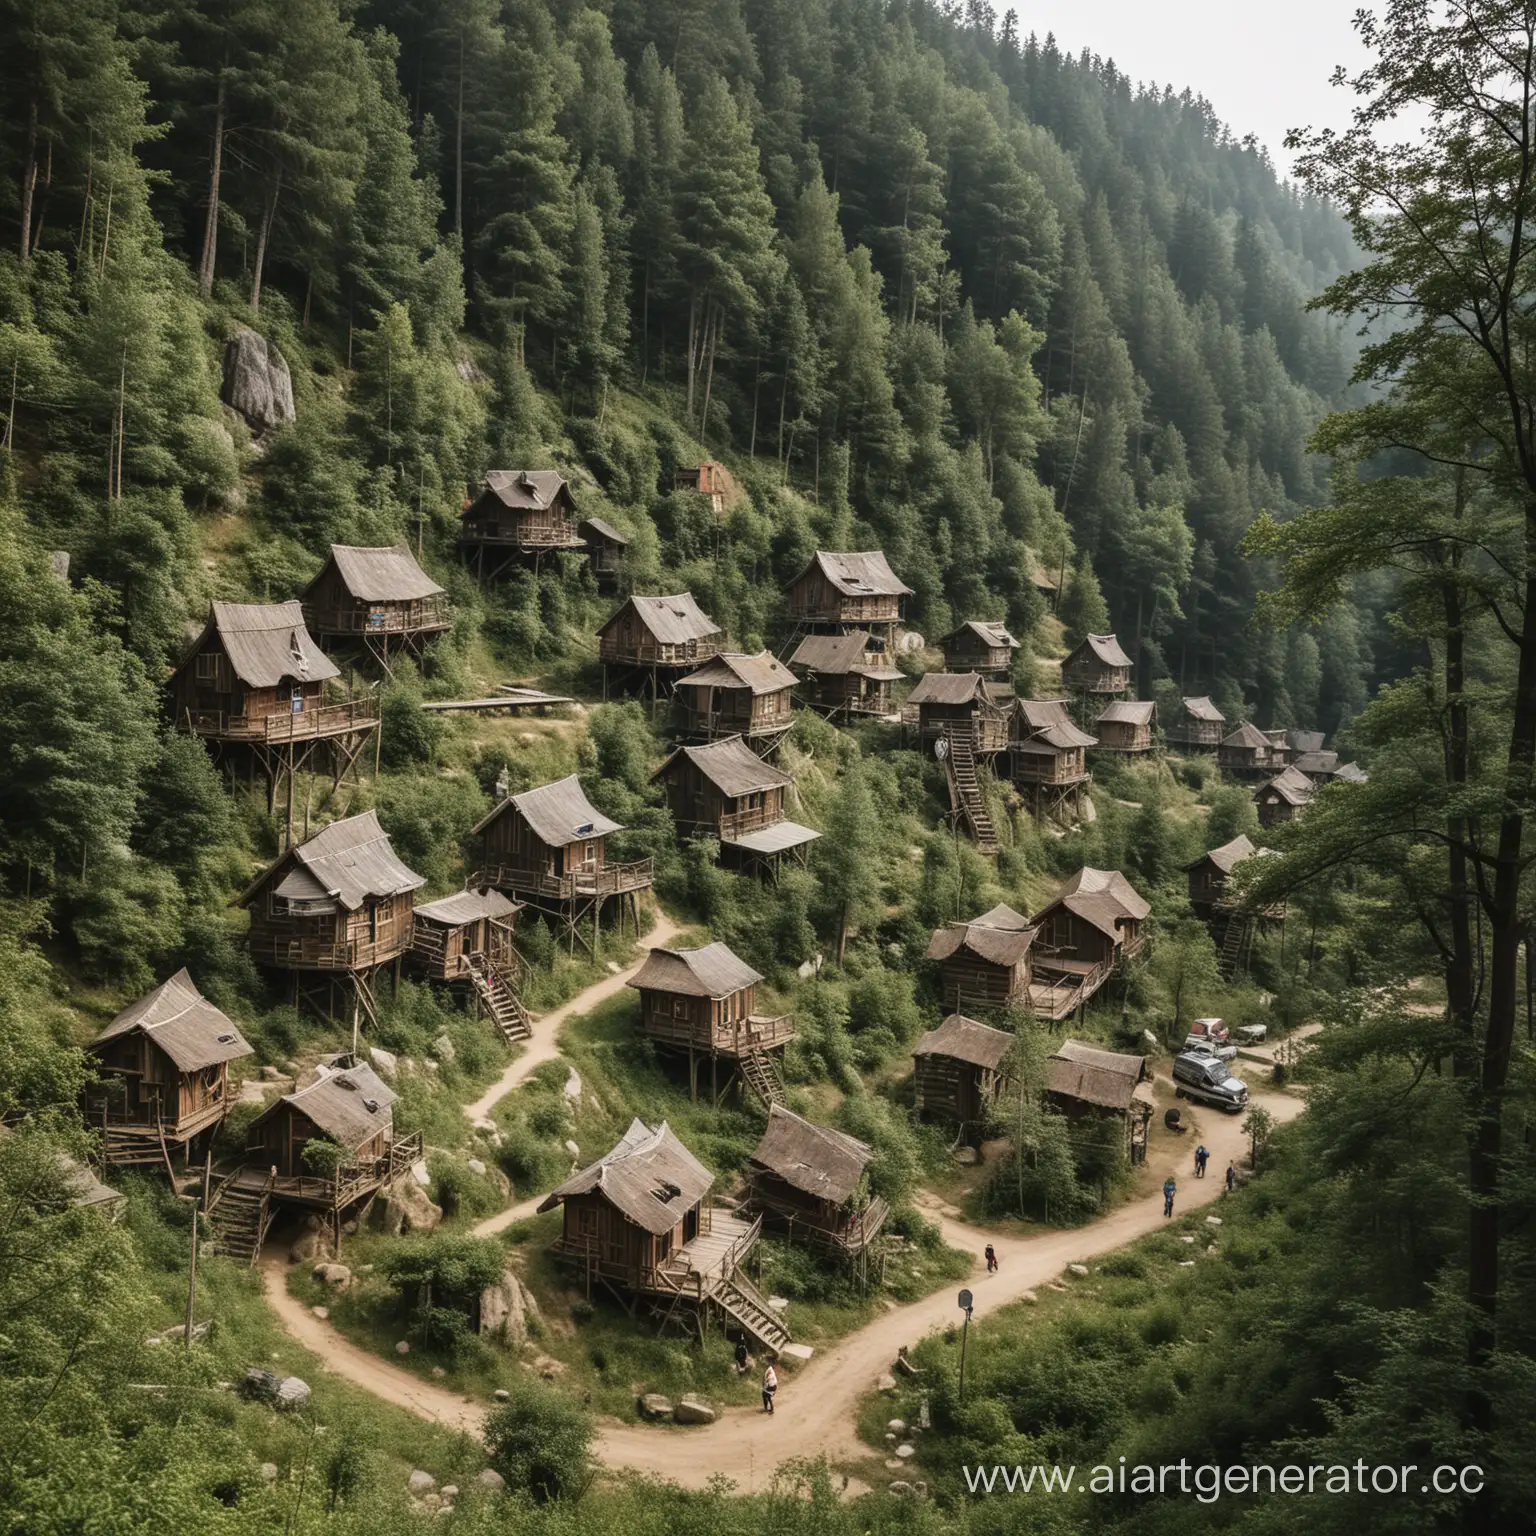 Diverse-Themed-Houses-in-Forest-Childrens-Camp